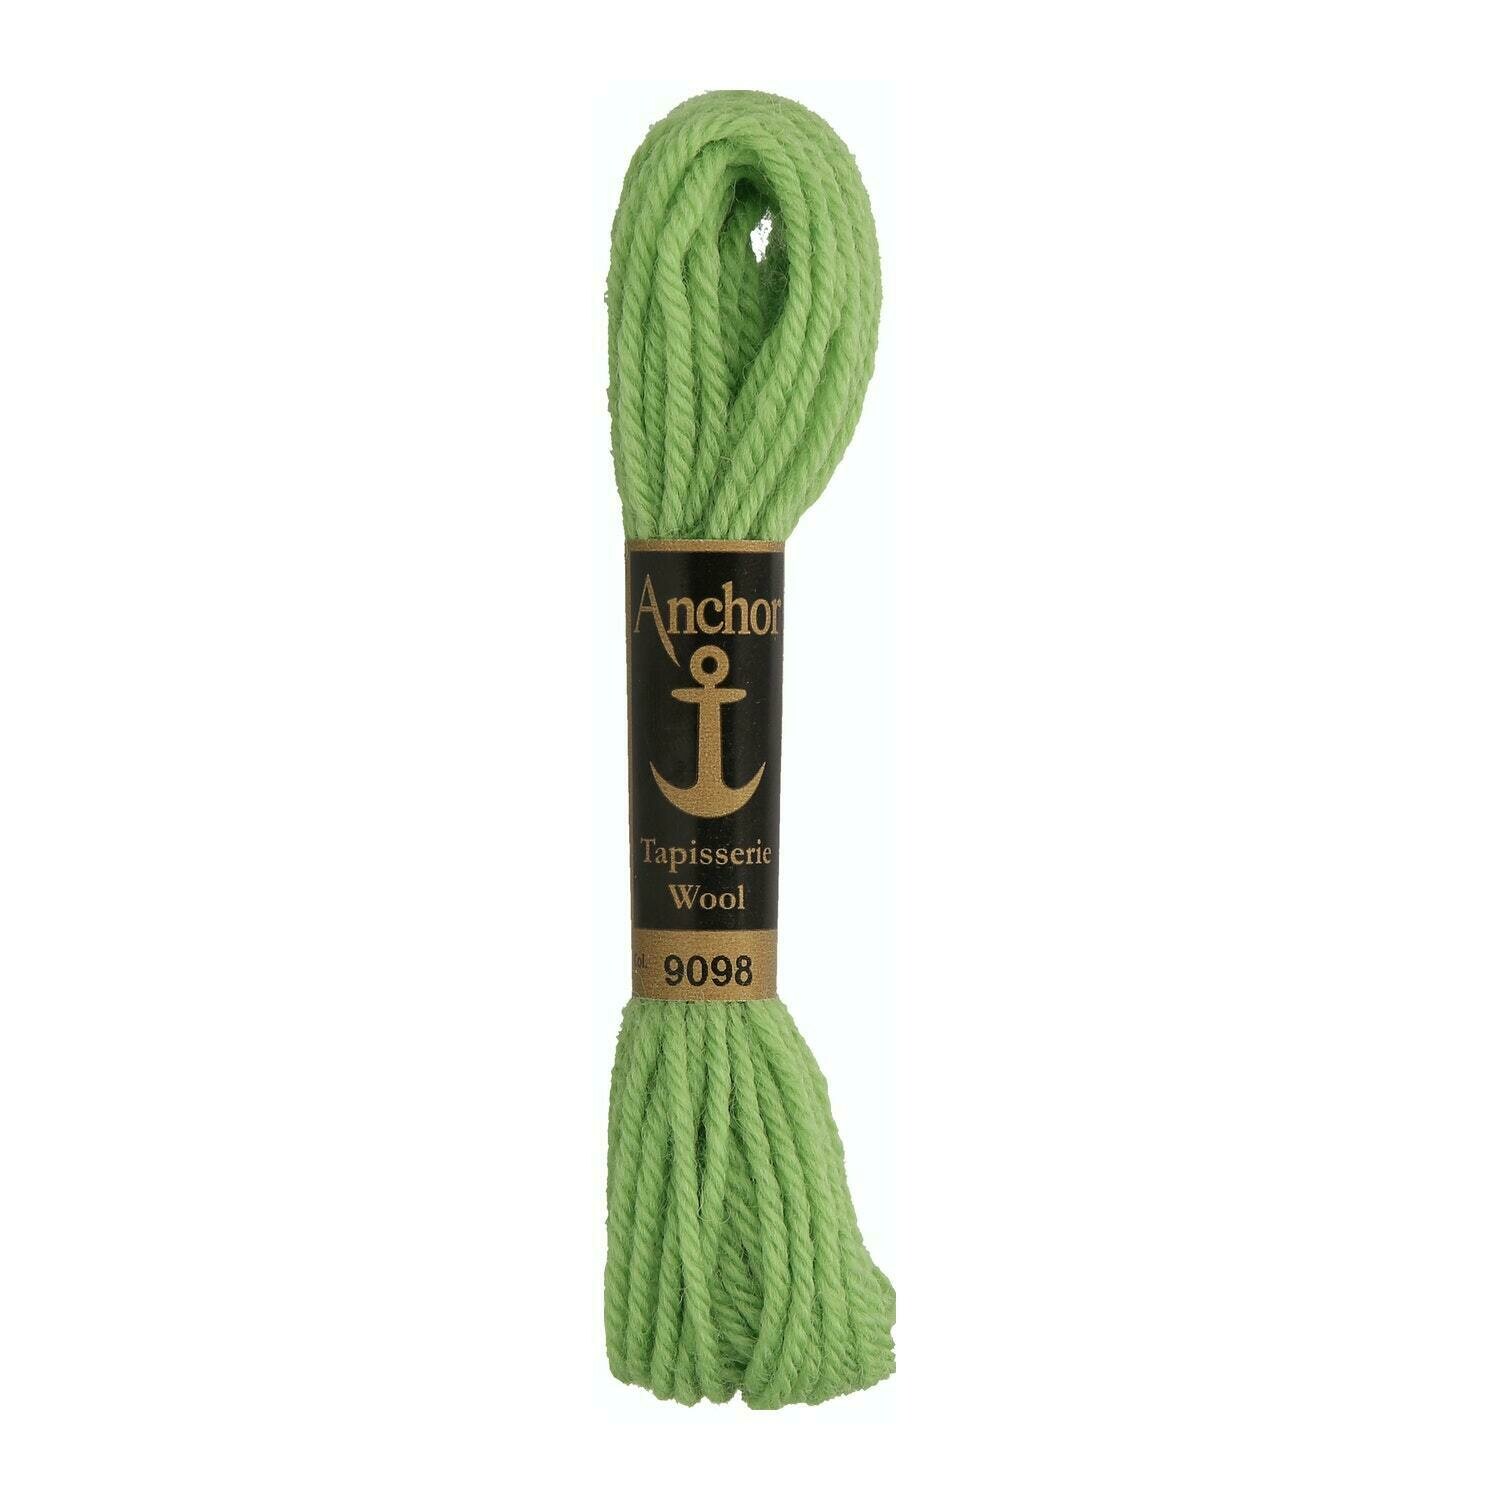 Anchor Tapisserie Wool #09098